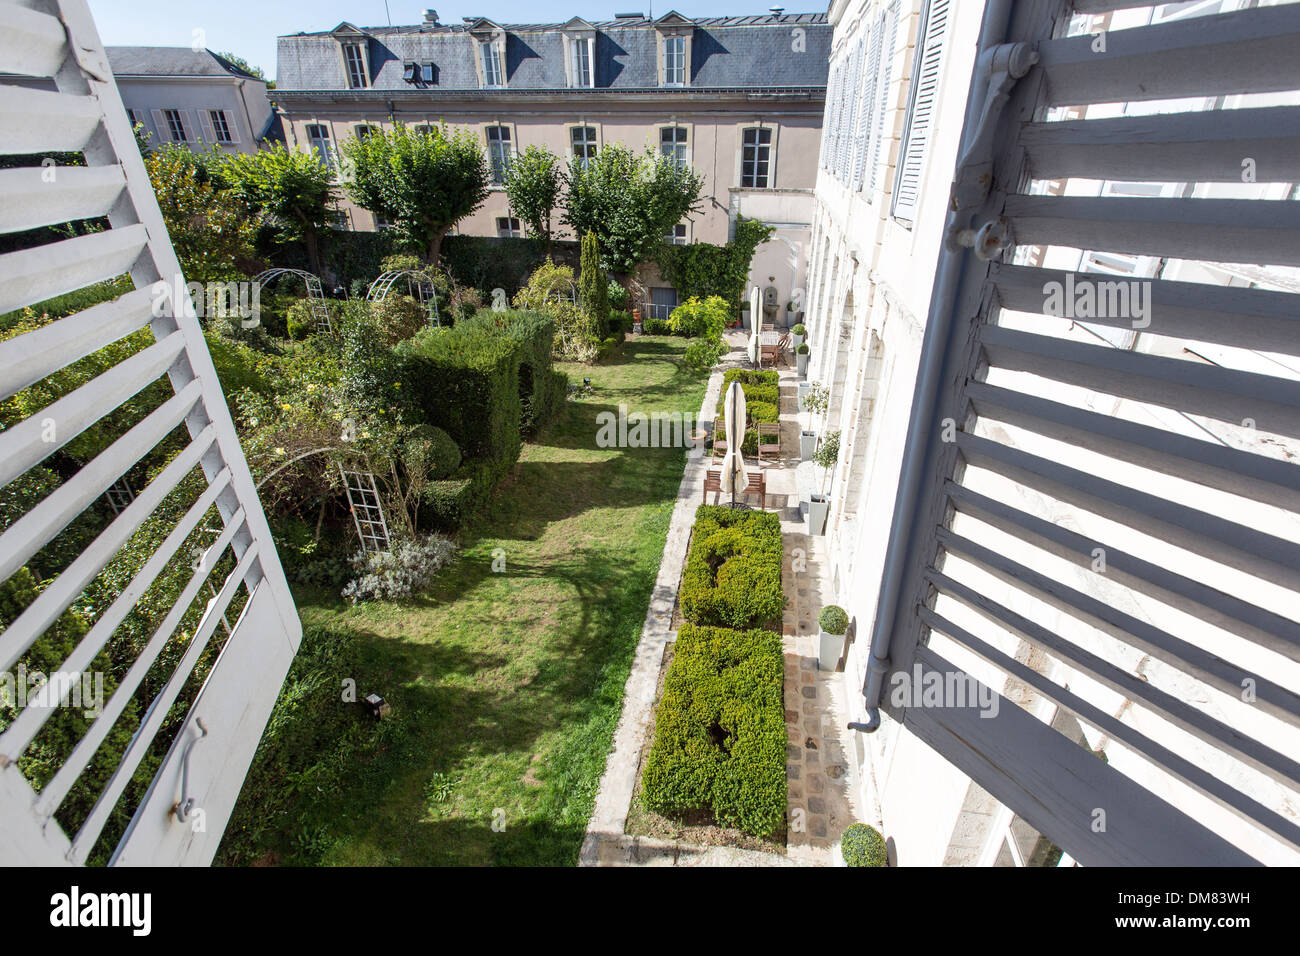 LANDSCAPED GARDEN, THE BED BREAKFAST 'AILLEURS‚Äô IN THE FORMER BISHOP'S PALACE OF CHARTRES, EURE-ET-LOIR (28), FRANCE Stock Photo